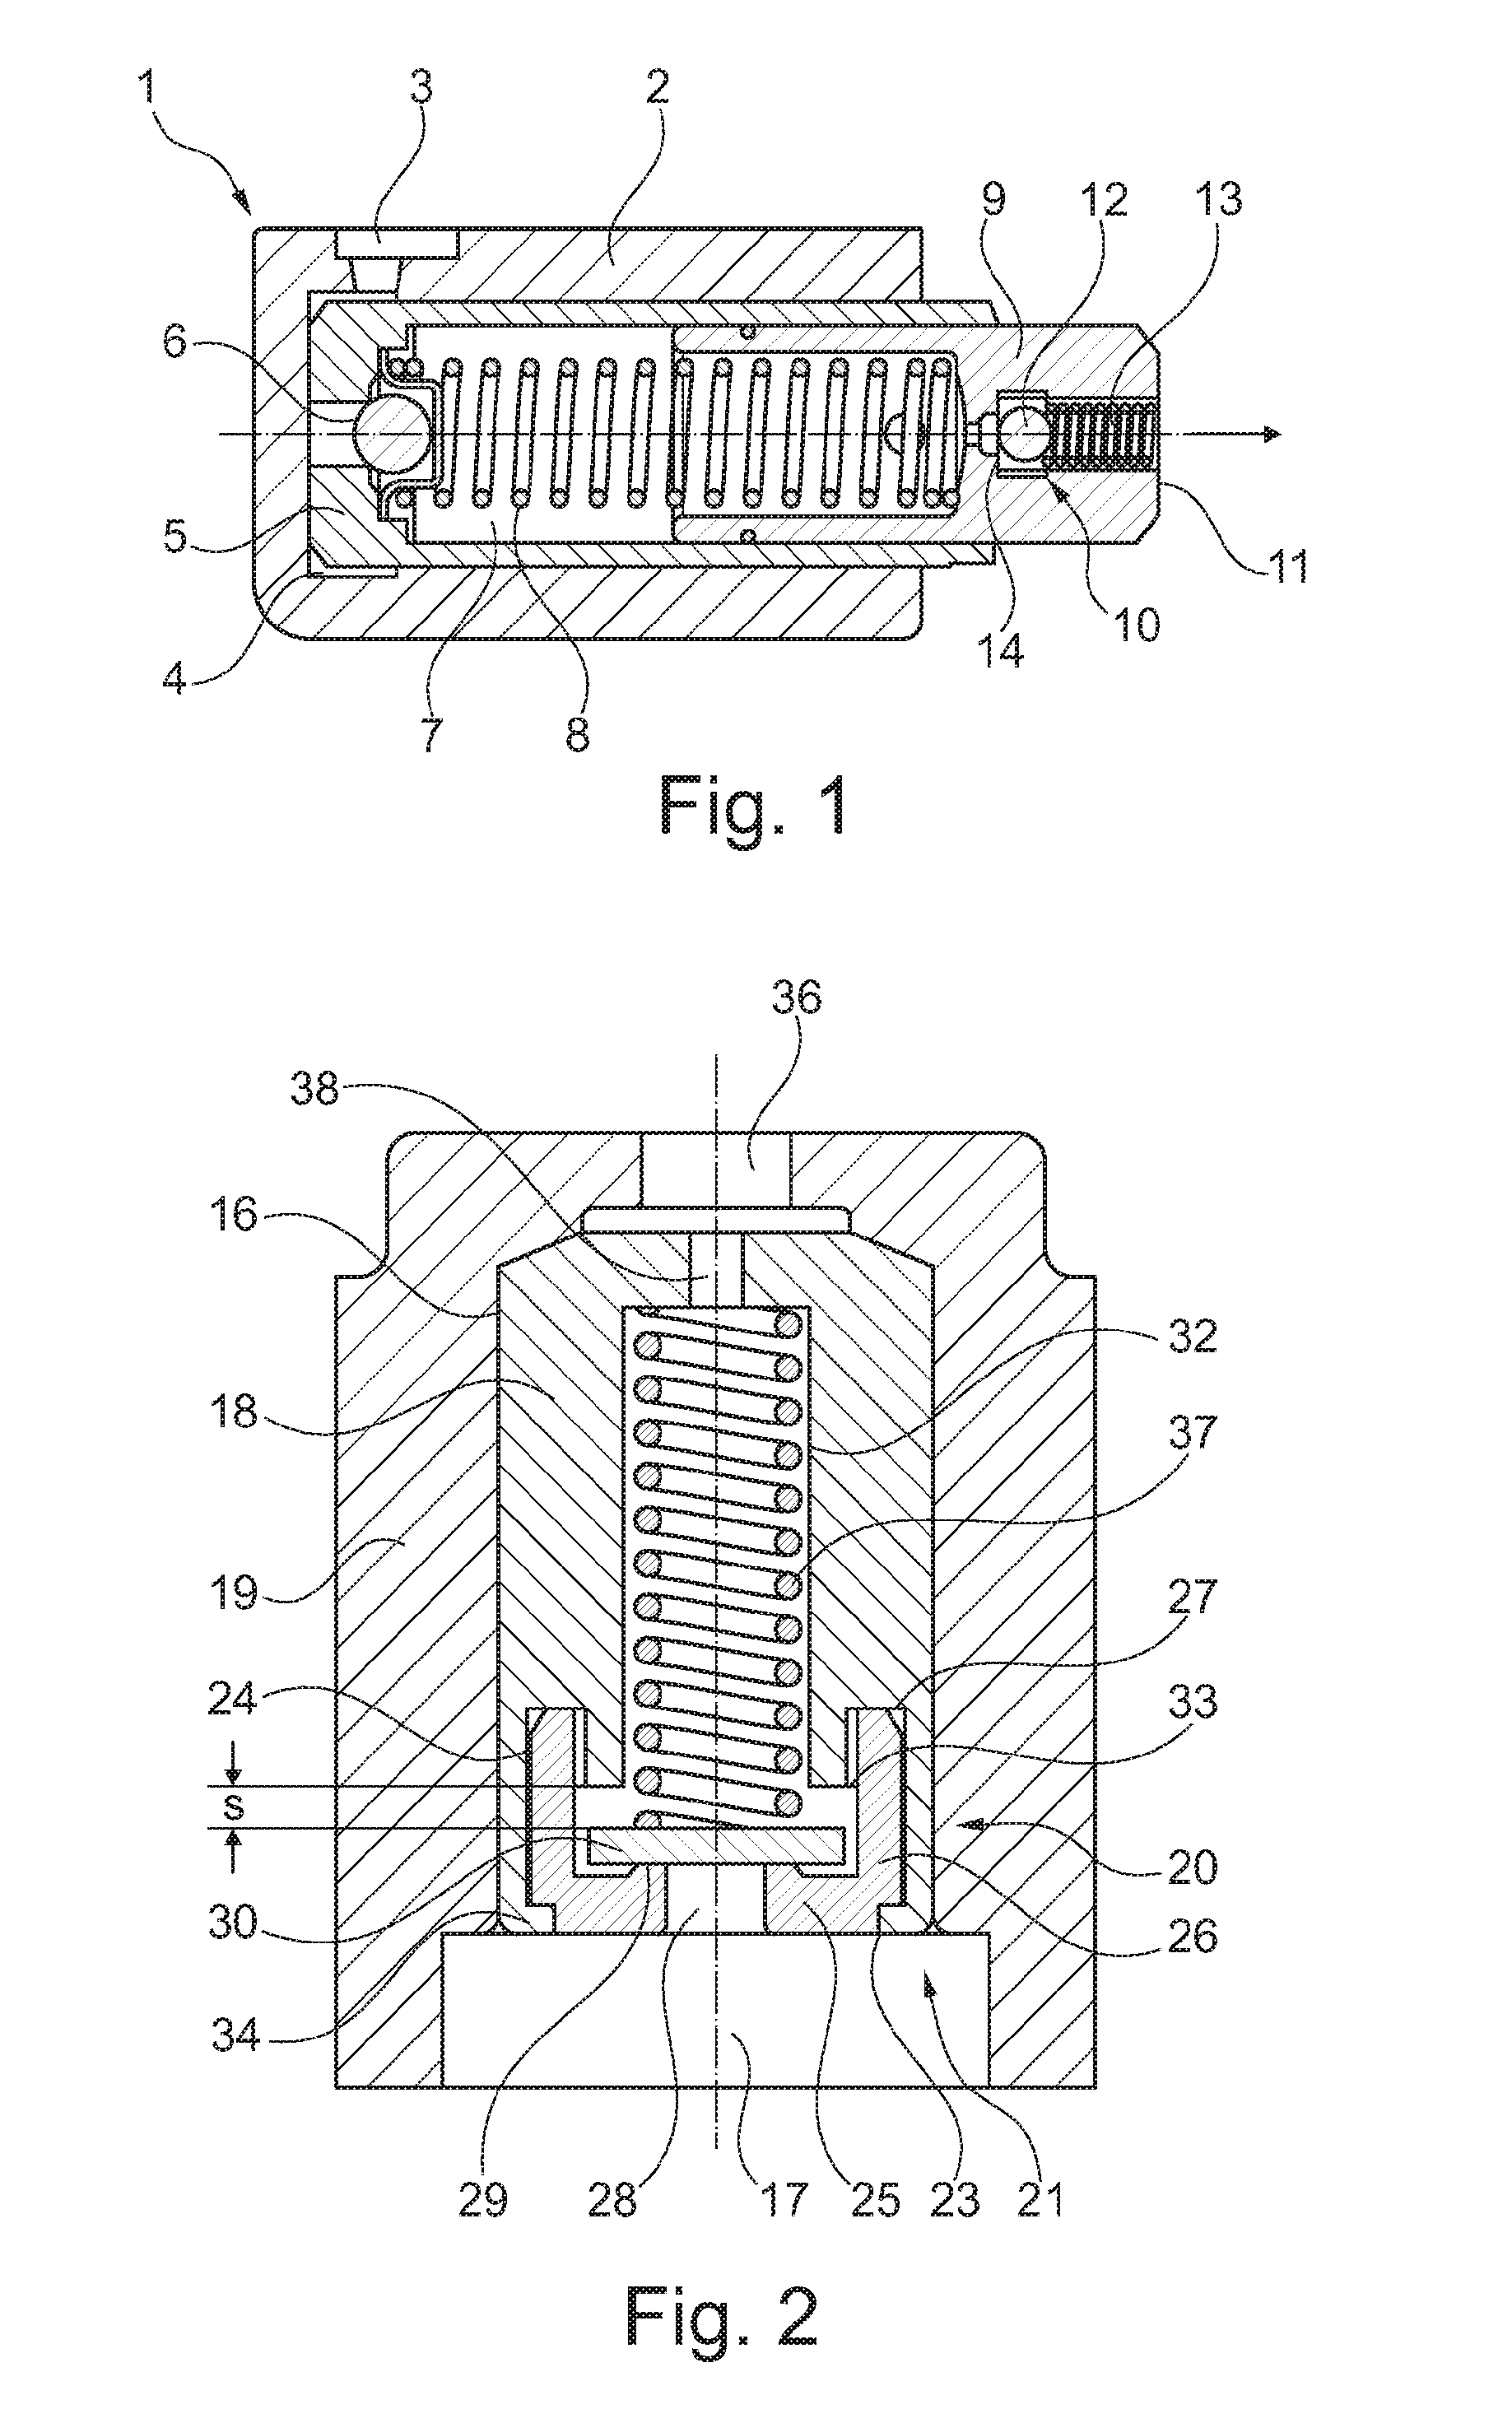 Hydraulic tensioning device for a traction mechanism drive